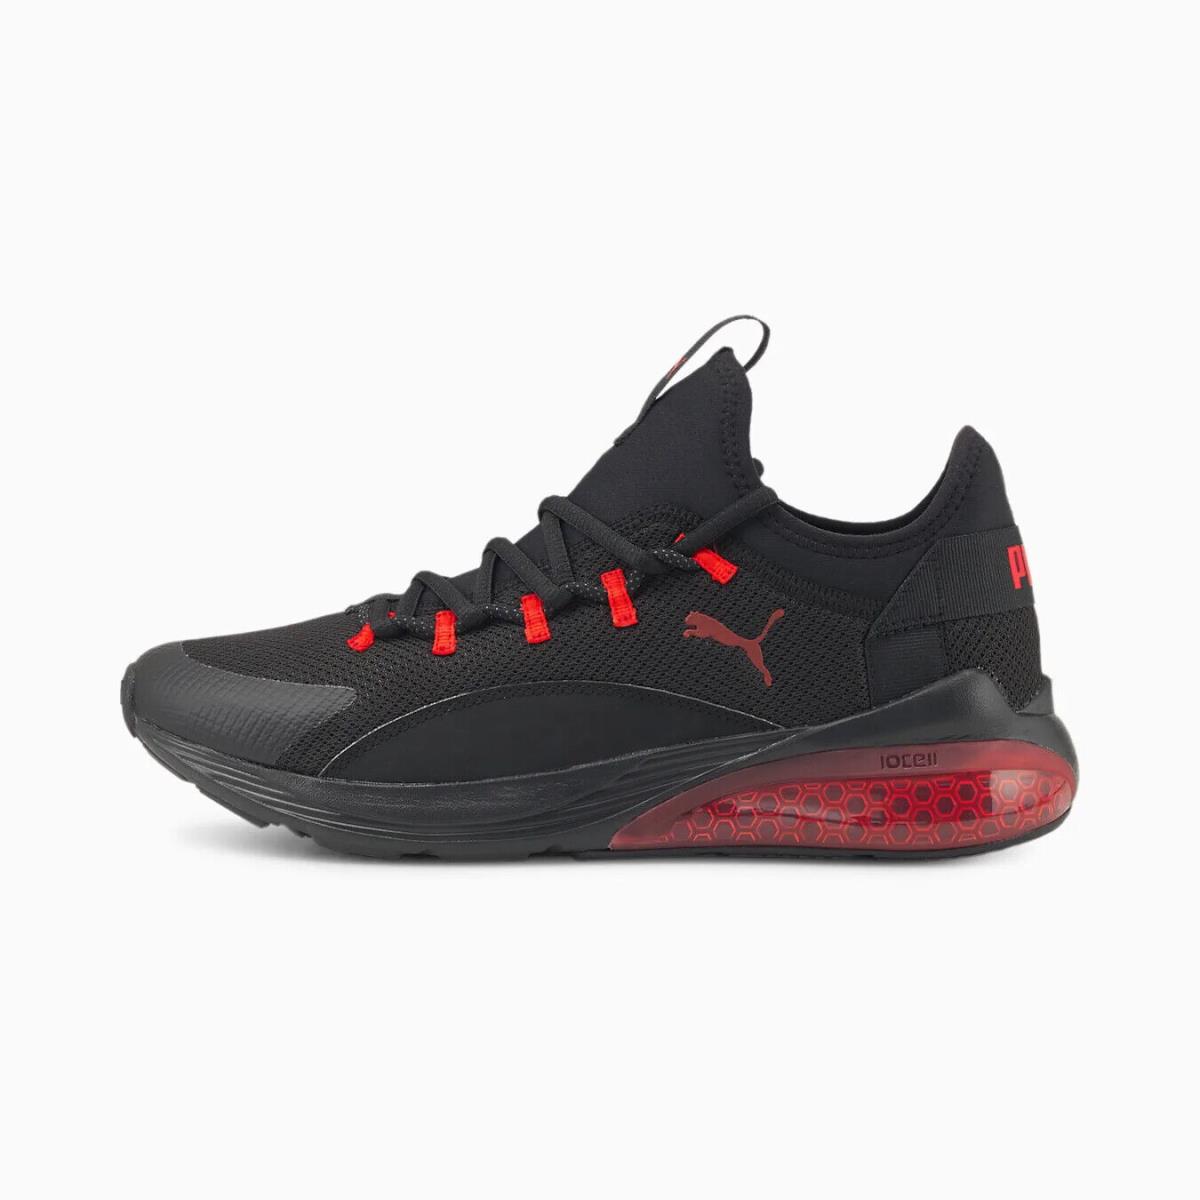 Puma Men`s Cell Vive Running Shoes Multicolor Size US 10.5 376180 Puma Black-High Risk Red